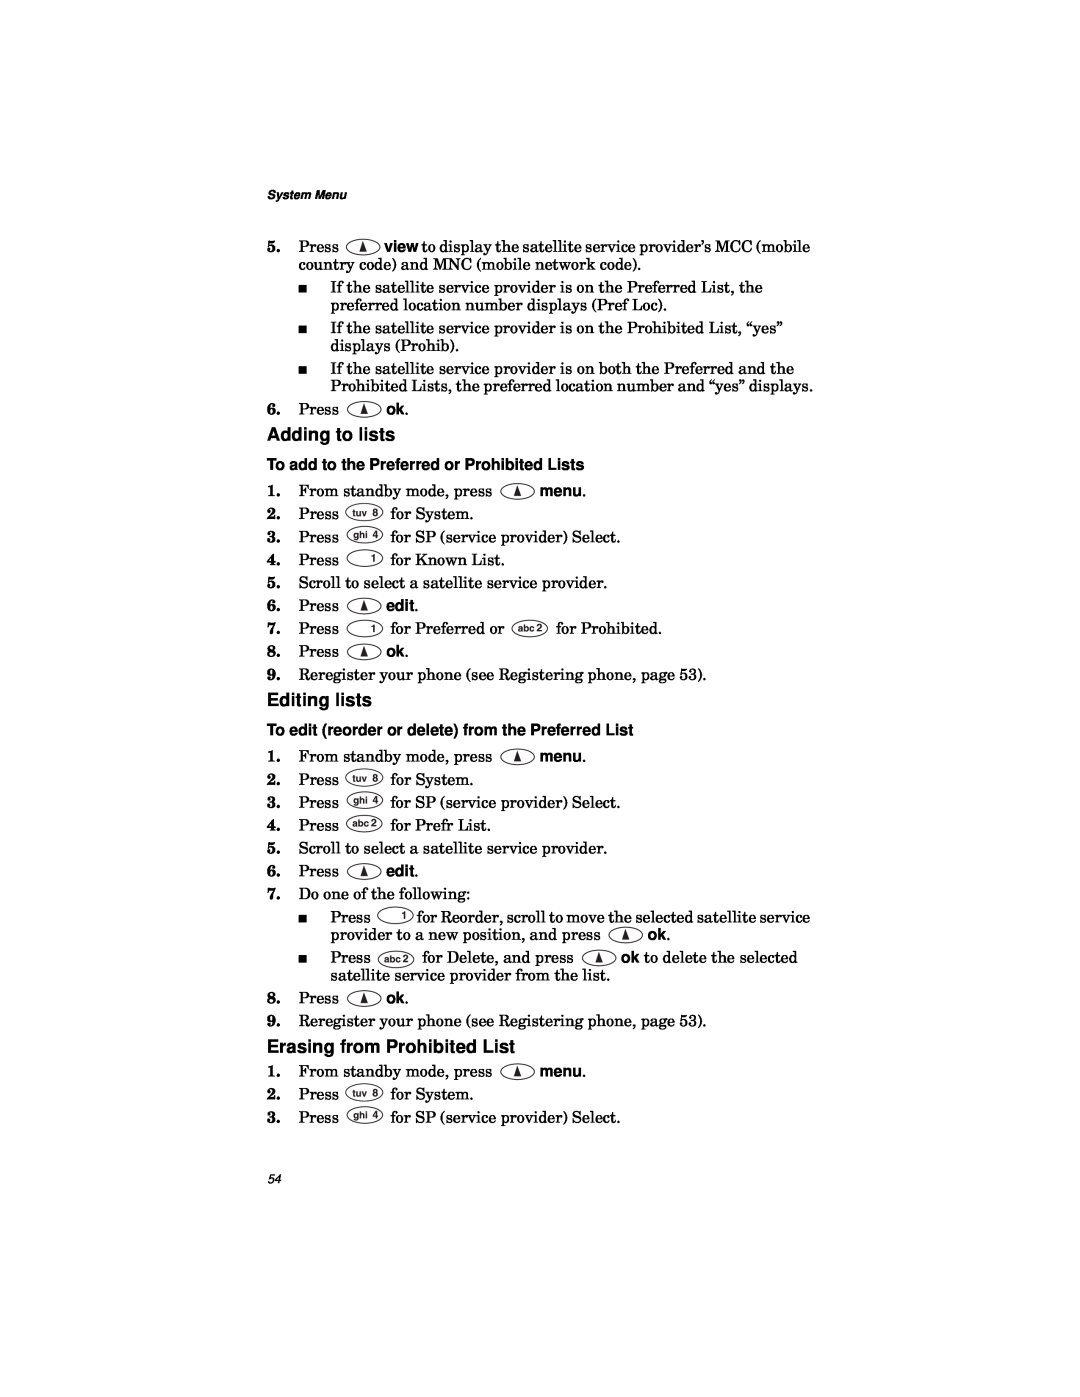 Qualcomm GSP-1600 manual Adding to lists, Editing lists, Erasing from Prohibited List 